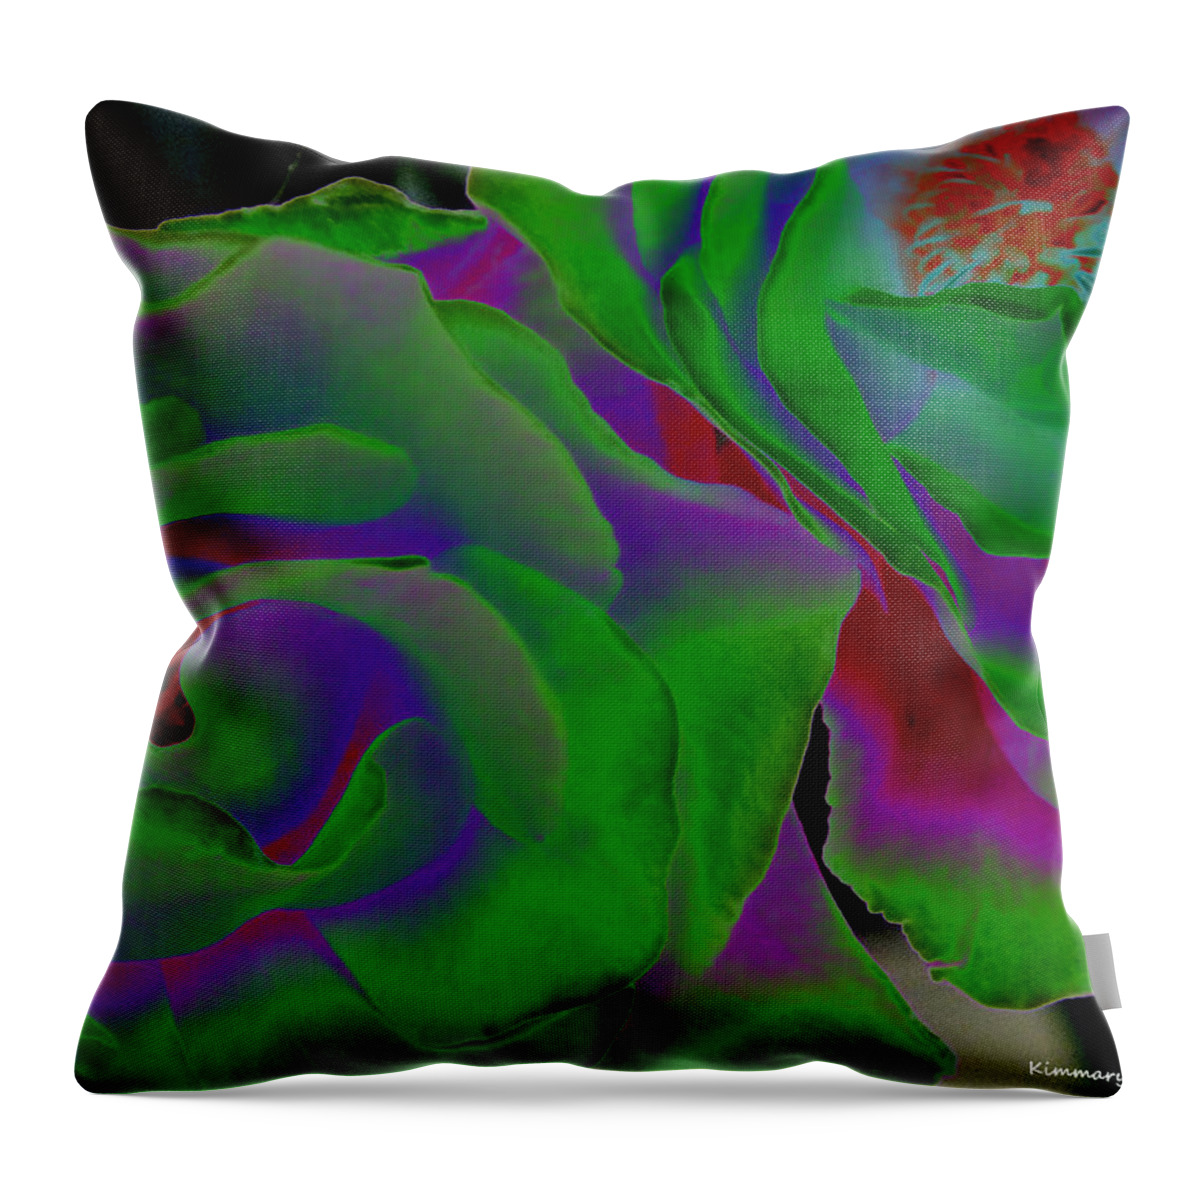 Botanical Throw Pillow featuring the photograph Gentle Camelias by Kimmary MacLean